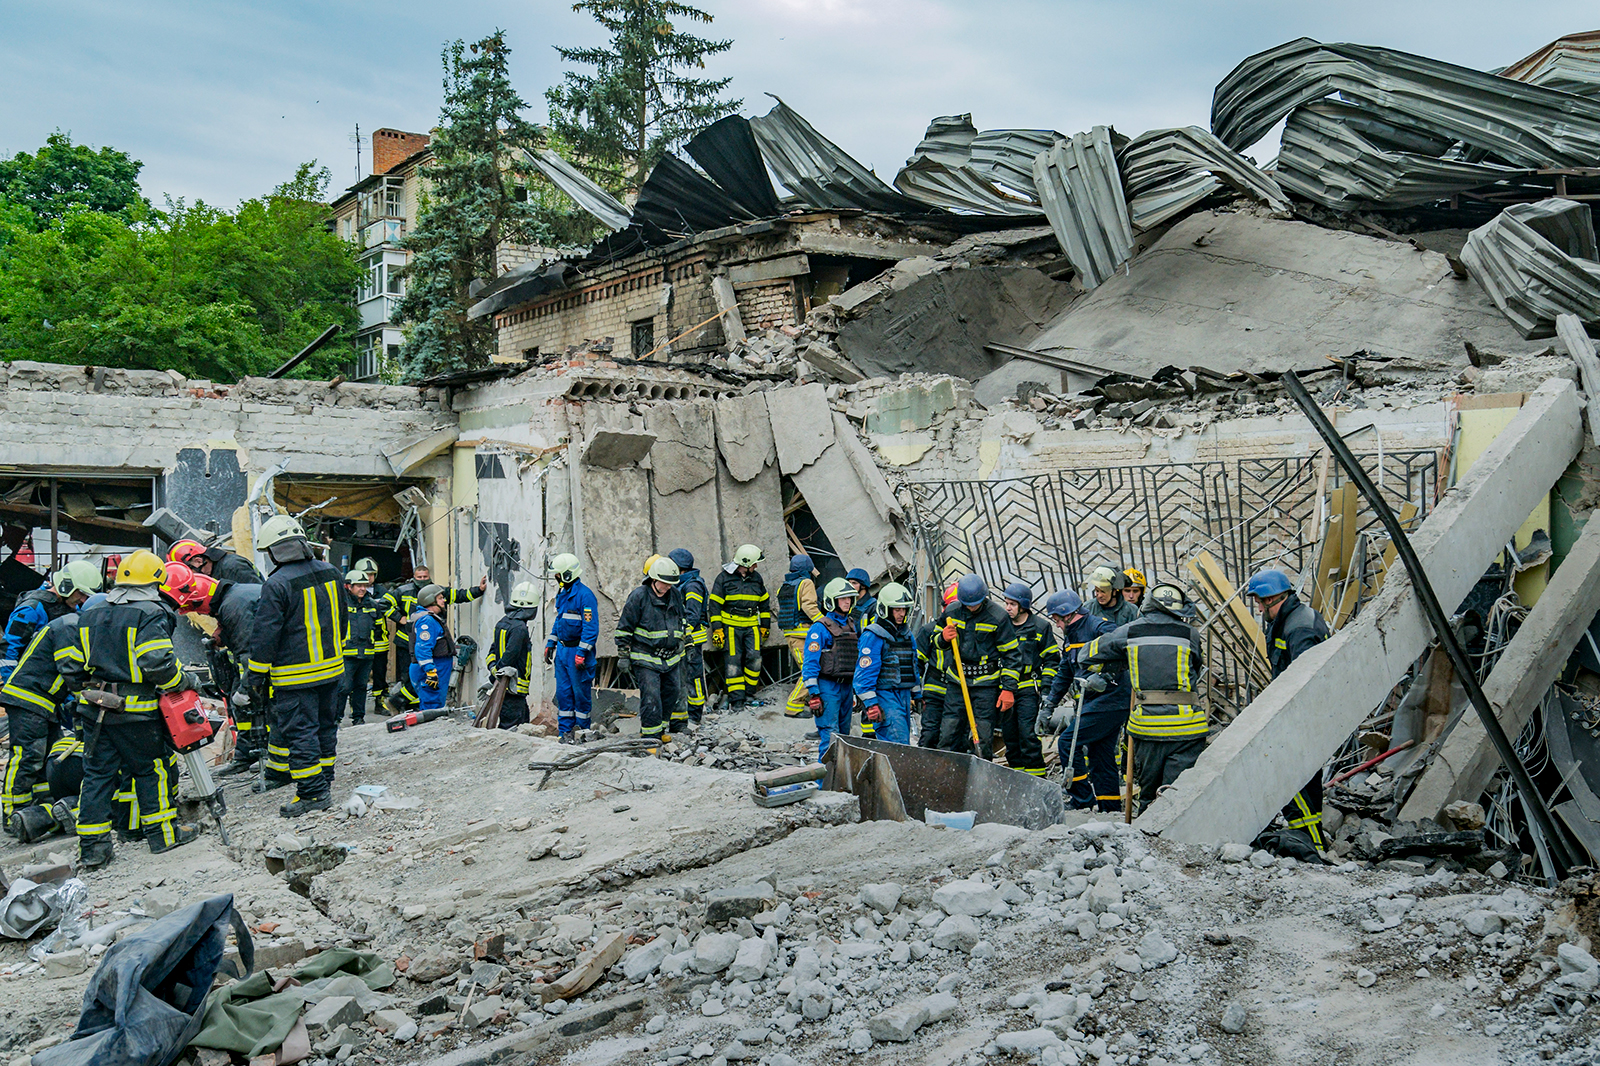 Rescue works in the center of the impact of a Russian missile strike in Kramatorsk, Ukraine on June 29.